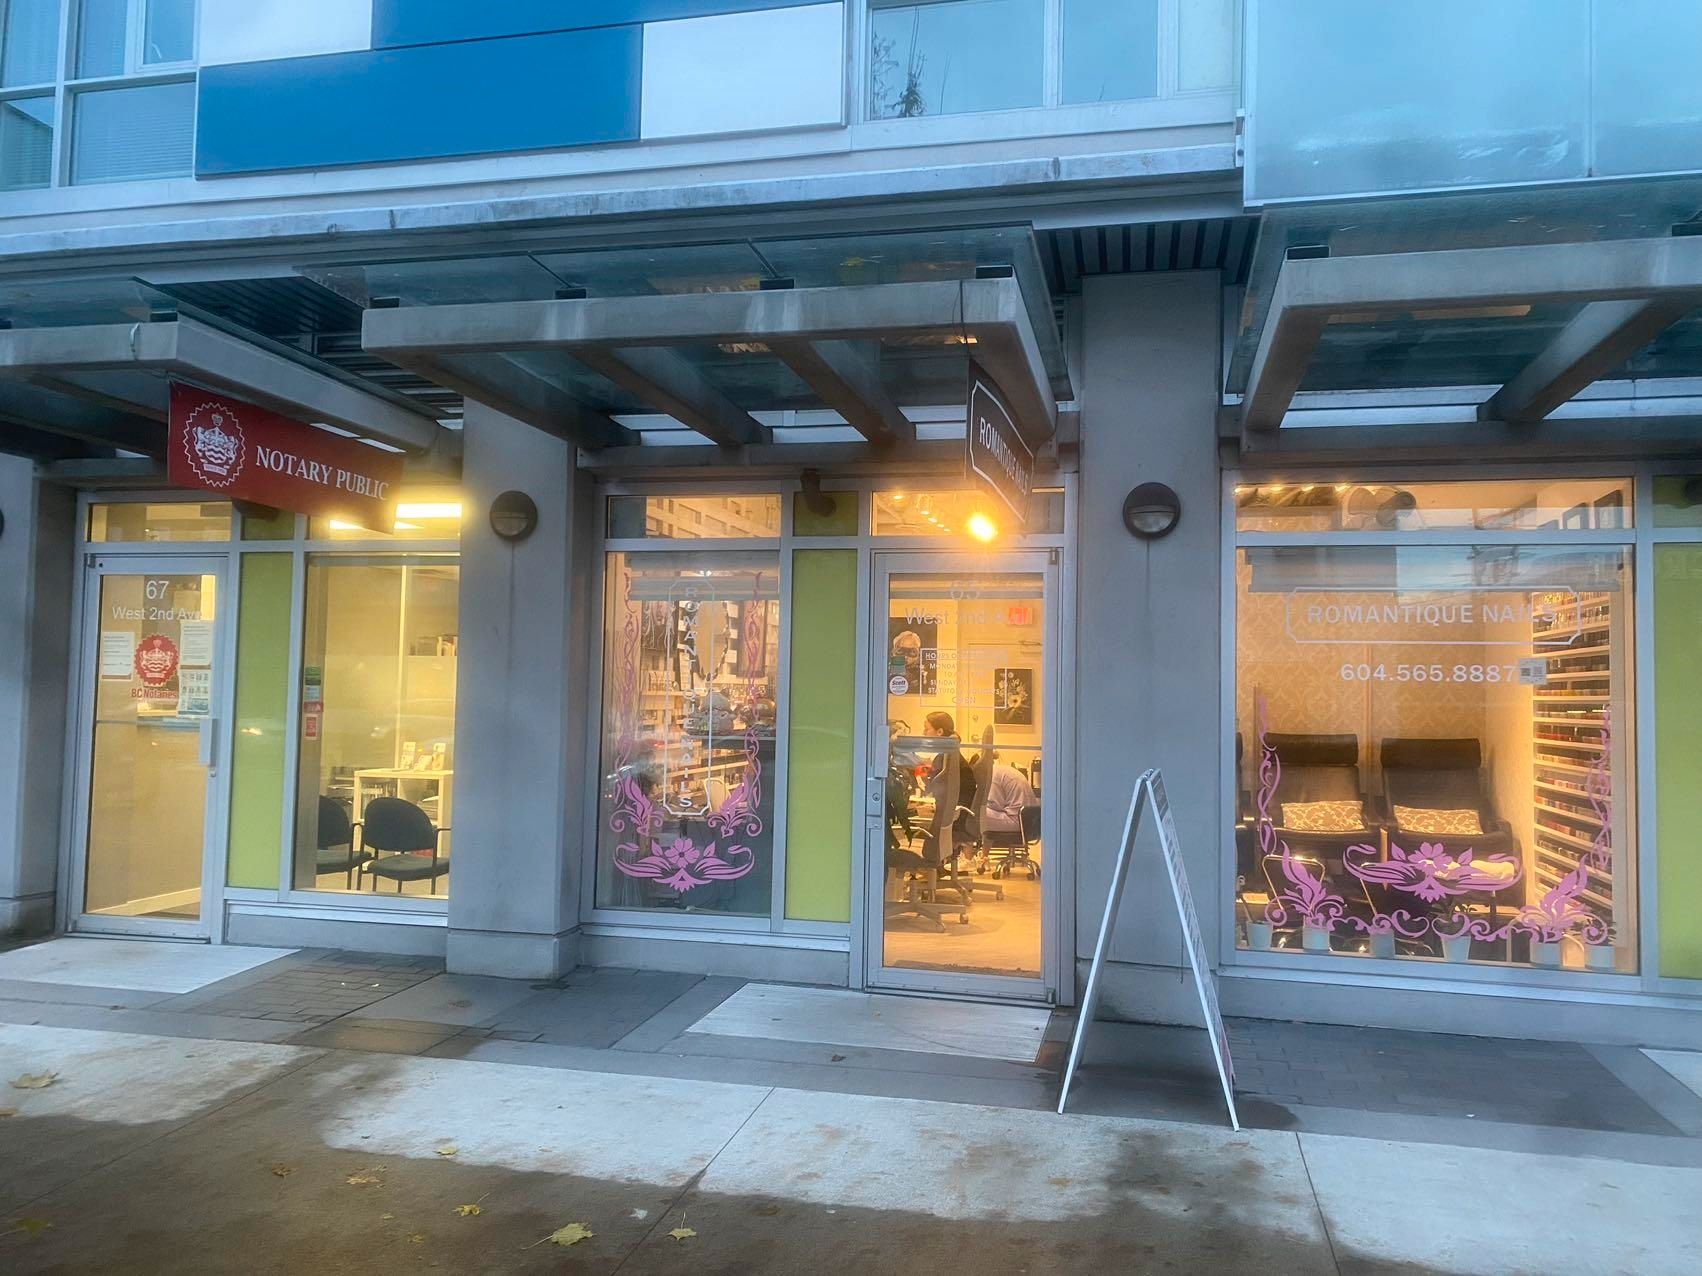 Main Photo: 65 W 2ND Avenue in Vancouver: False Creek Retail for sale (Vancouver West)  : MLS®# C8047971